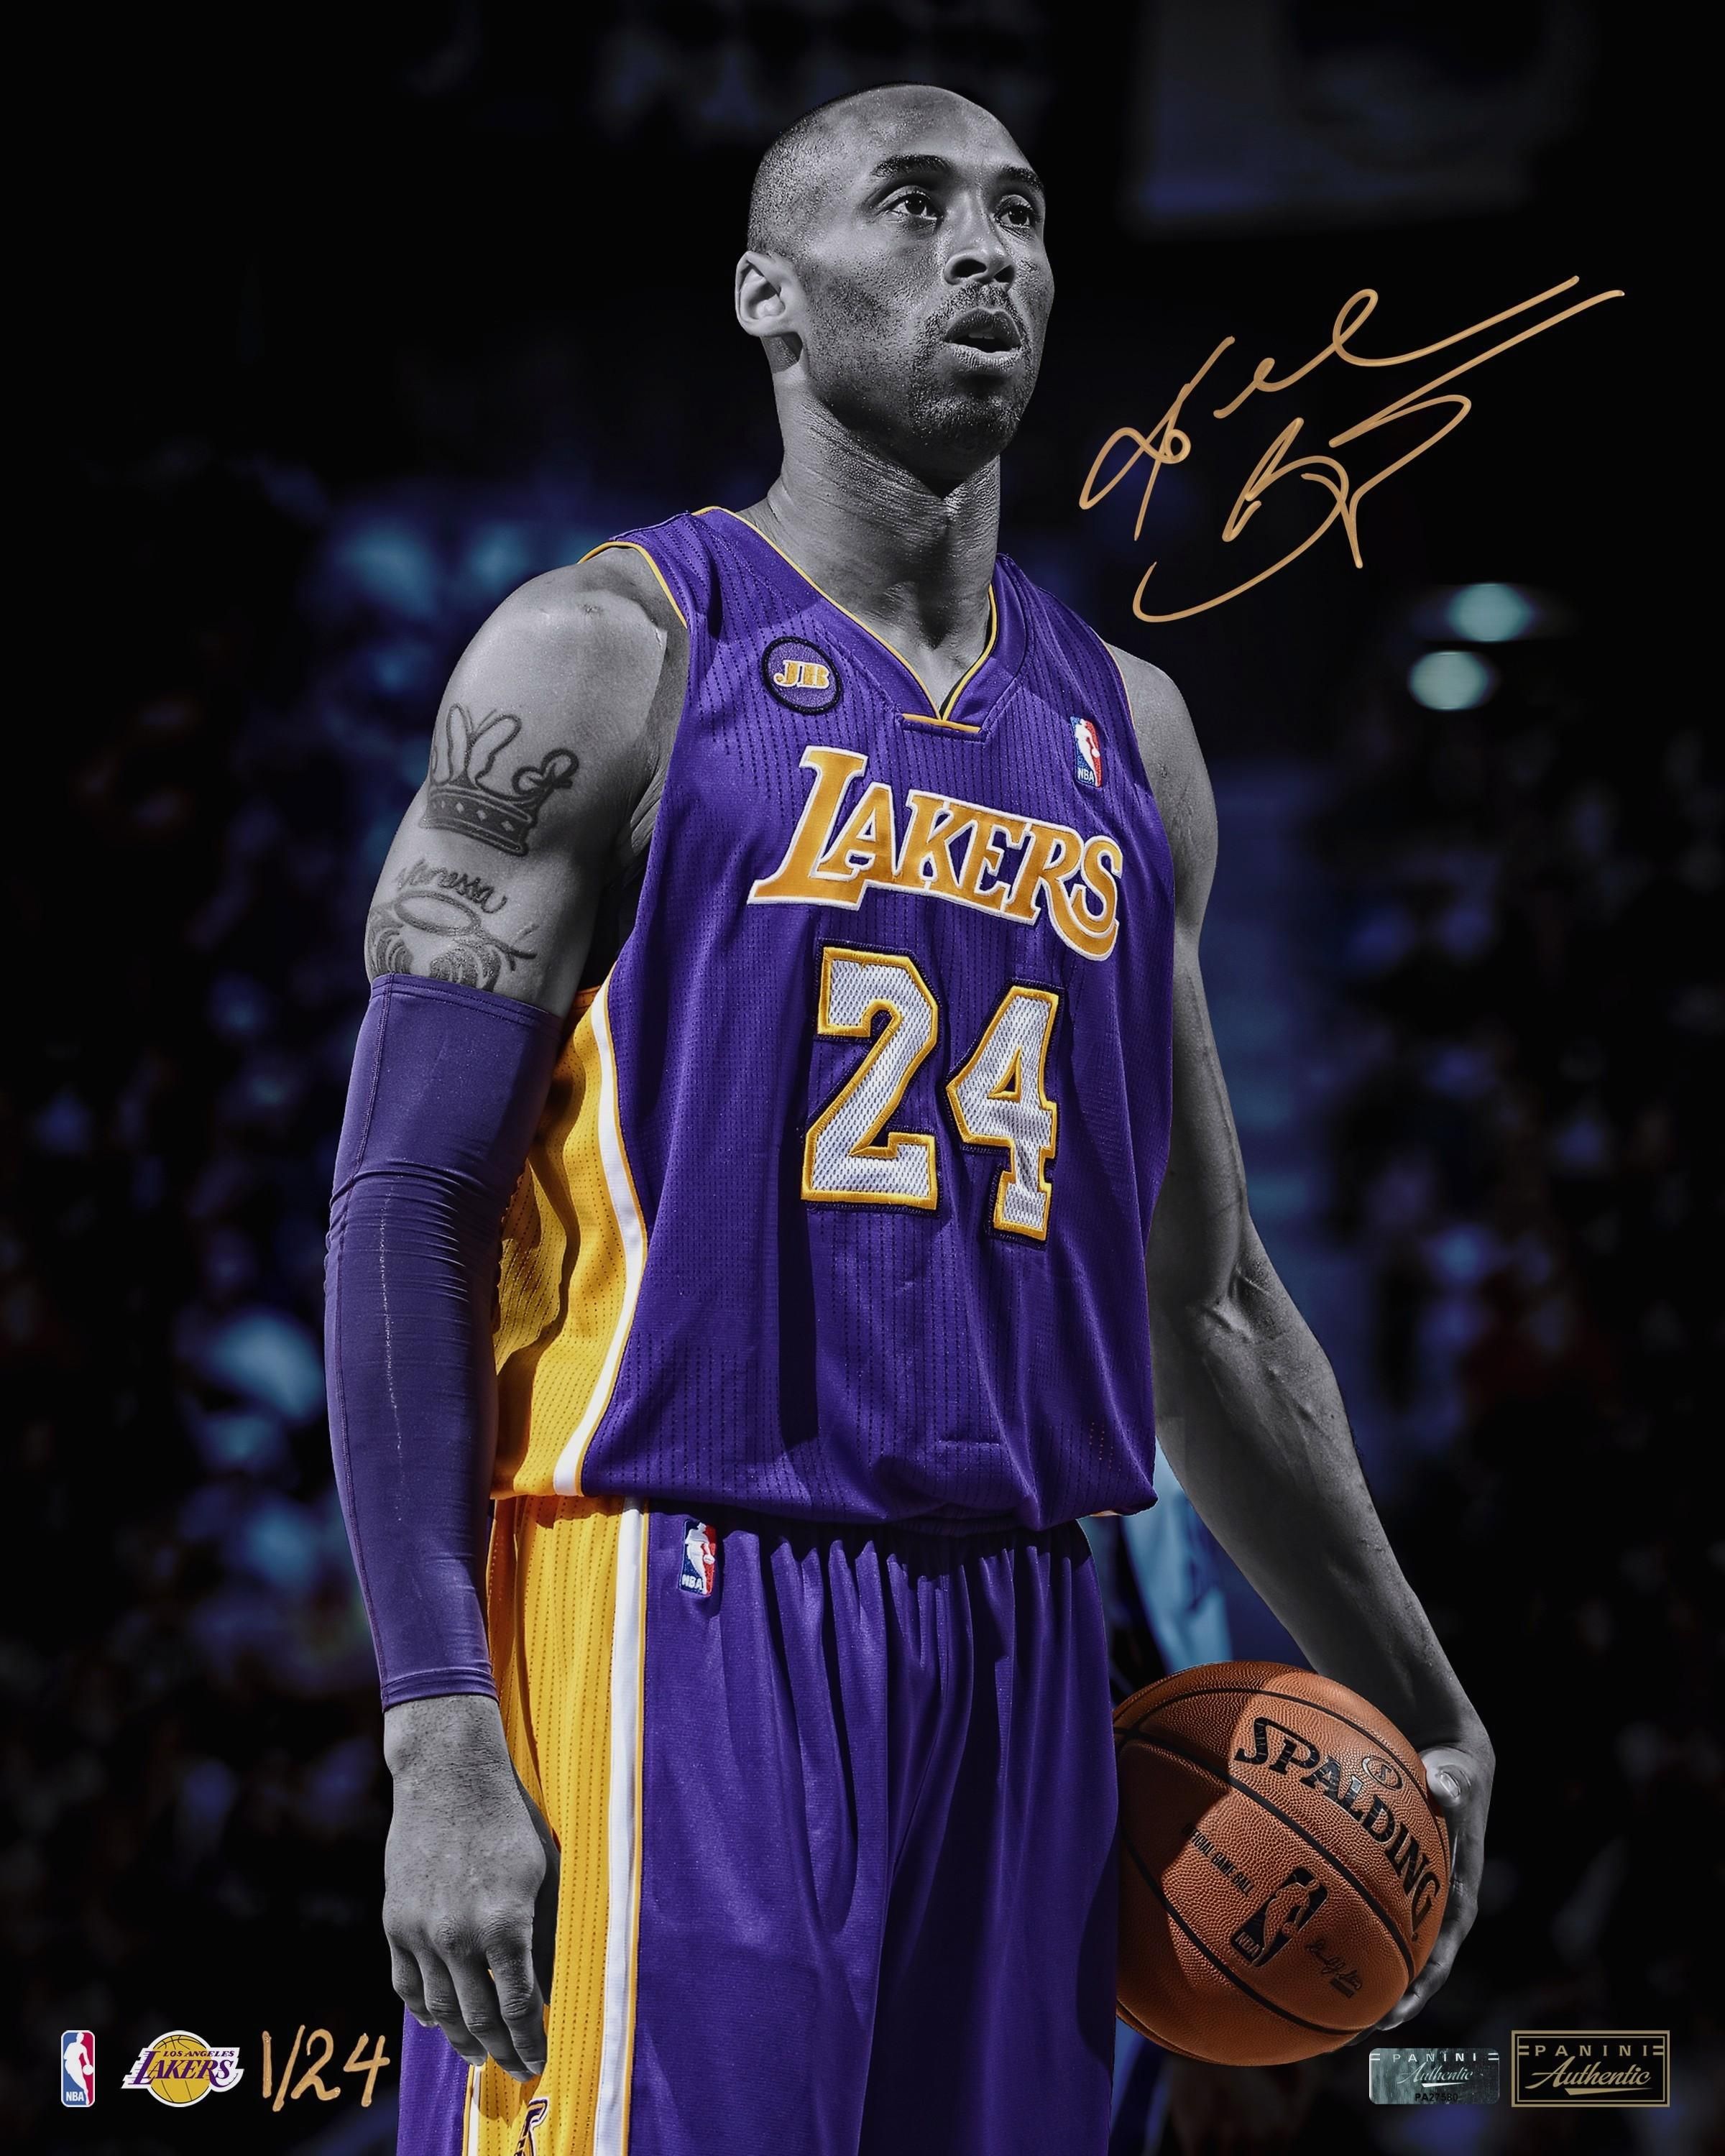 Kobe Wallpaper. Kobe bryant wallpaper, Kobe bryant picture, Kobe bryant poster